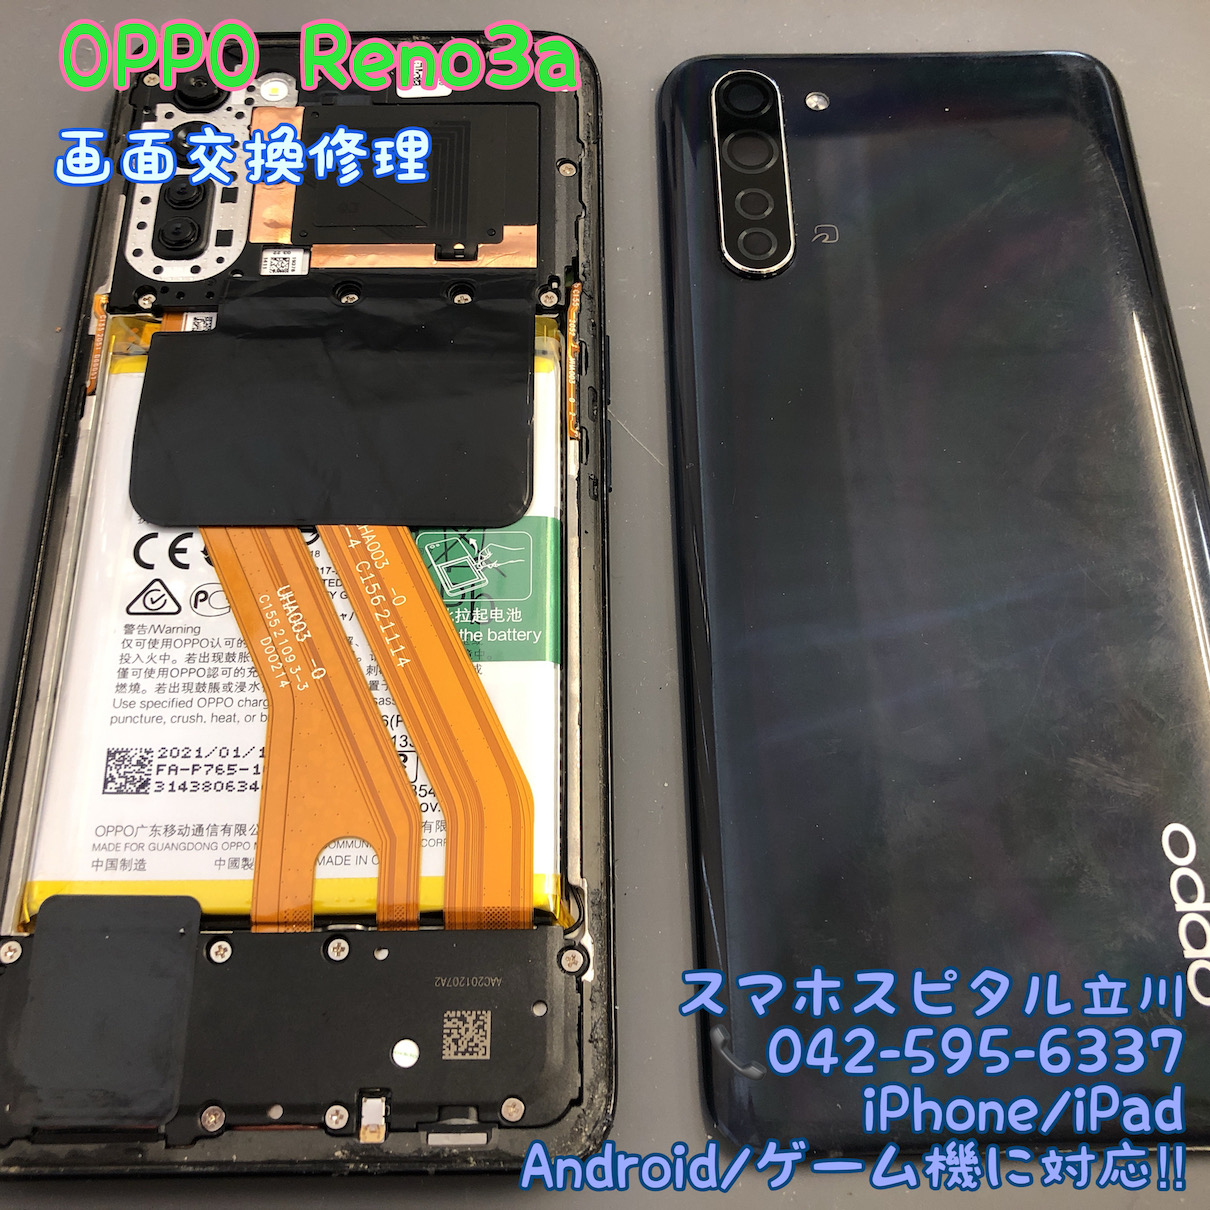 oppo reno3 a 画面交換品